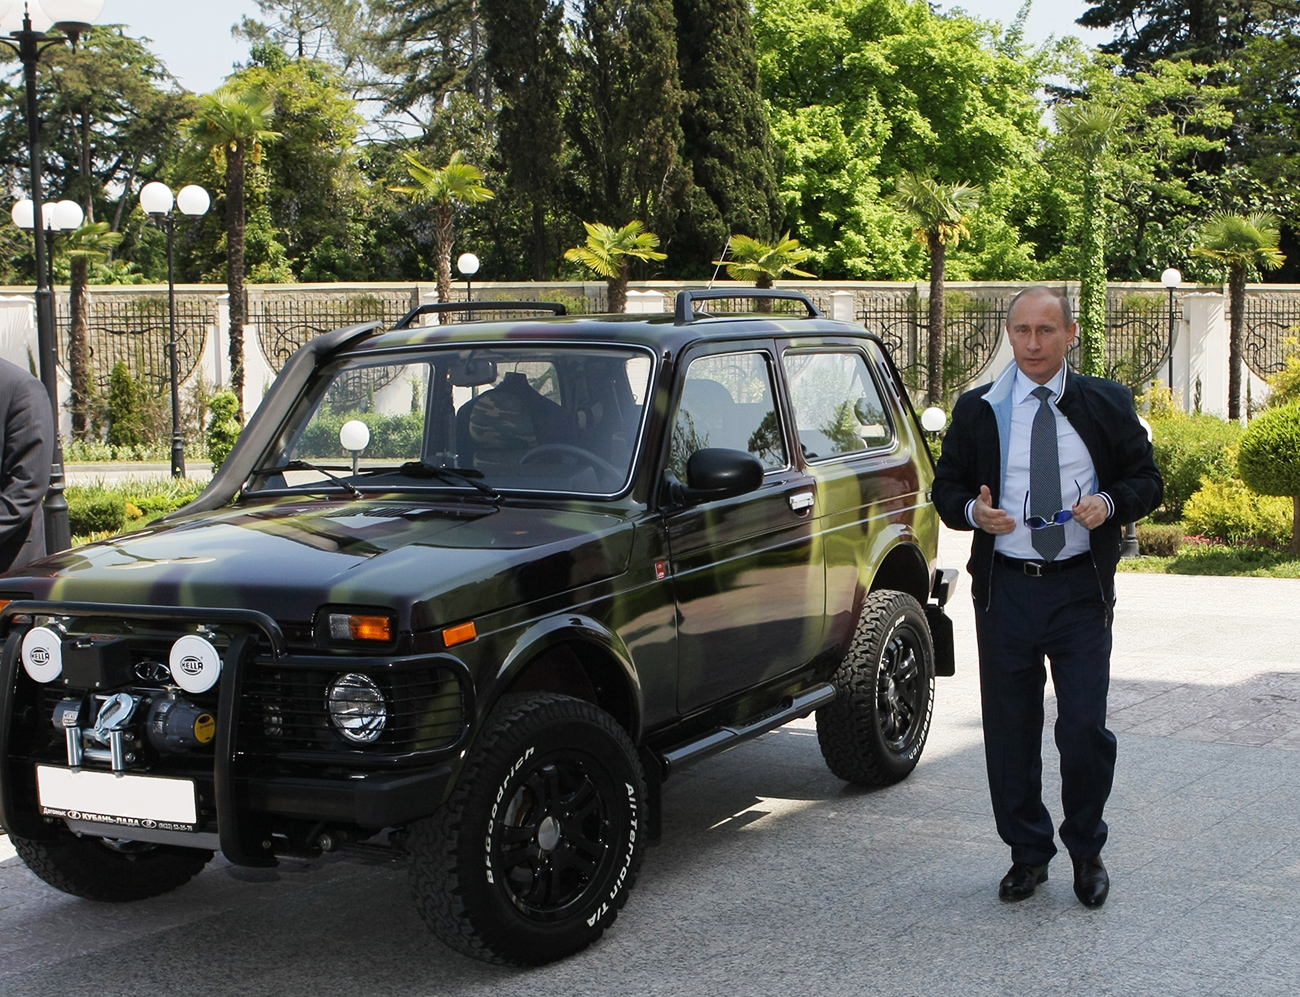 Vladimir Putin, Russian Prime Minister at the time of the photo, in the state residence Riviera 6 in Sochi. There he showed journalists his Niva off-roadster, the car Putin, now serving as Russia’s President, still owns.